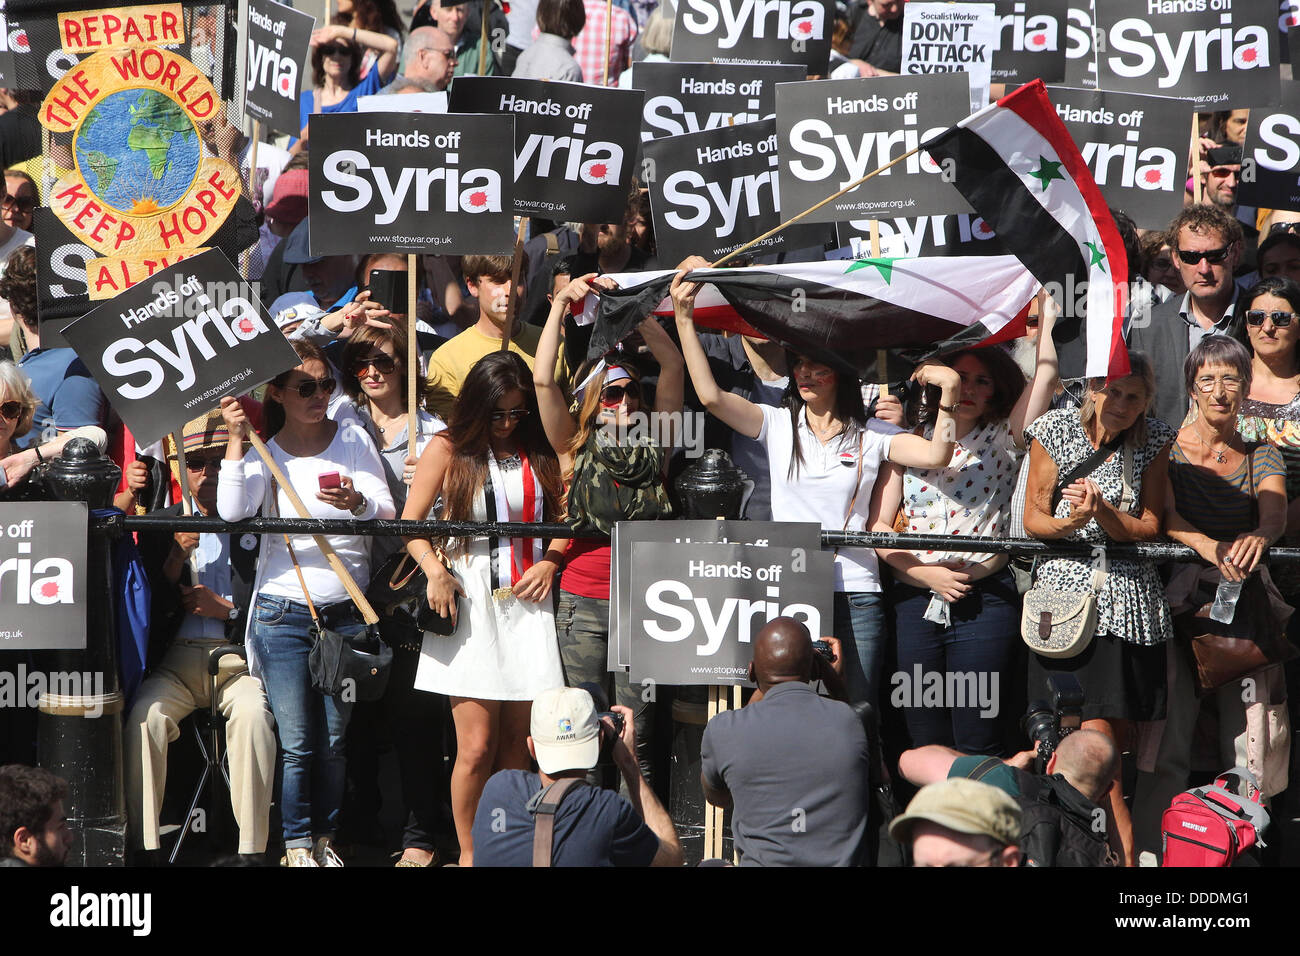 Rally to protest against the war in Syria at Trafalgar Square. London, United Kingdom, 31/08/2013  Credit:  Mario Mitsis / Alamy Live News Stock Photo